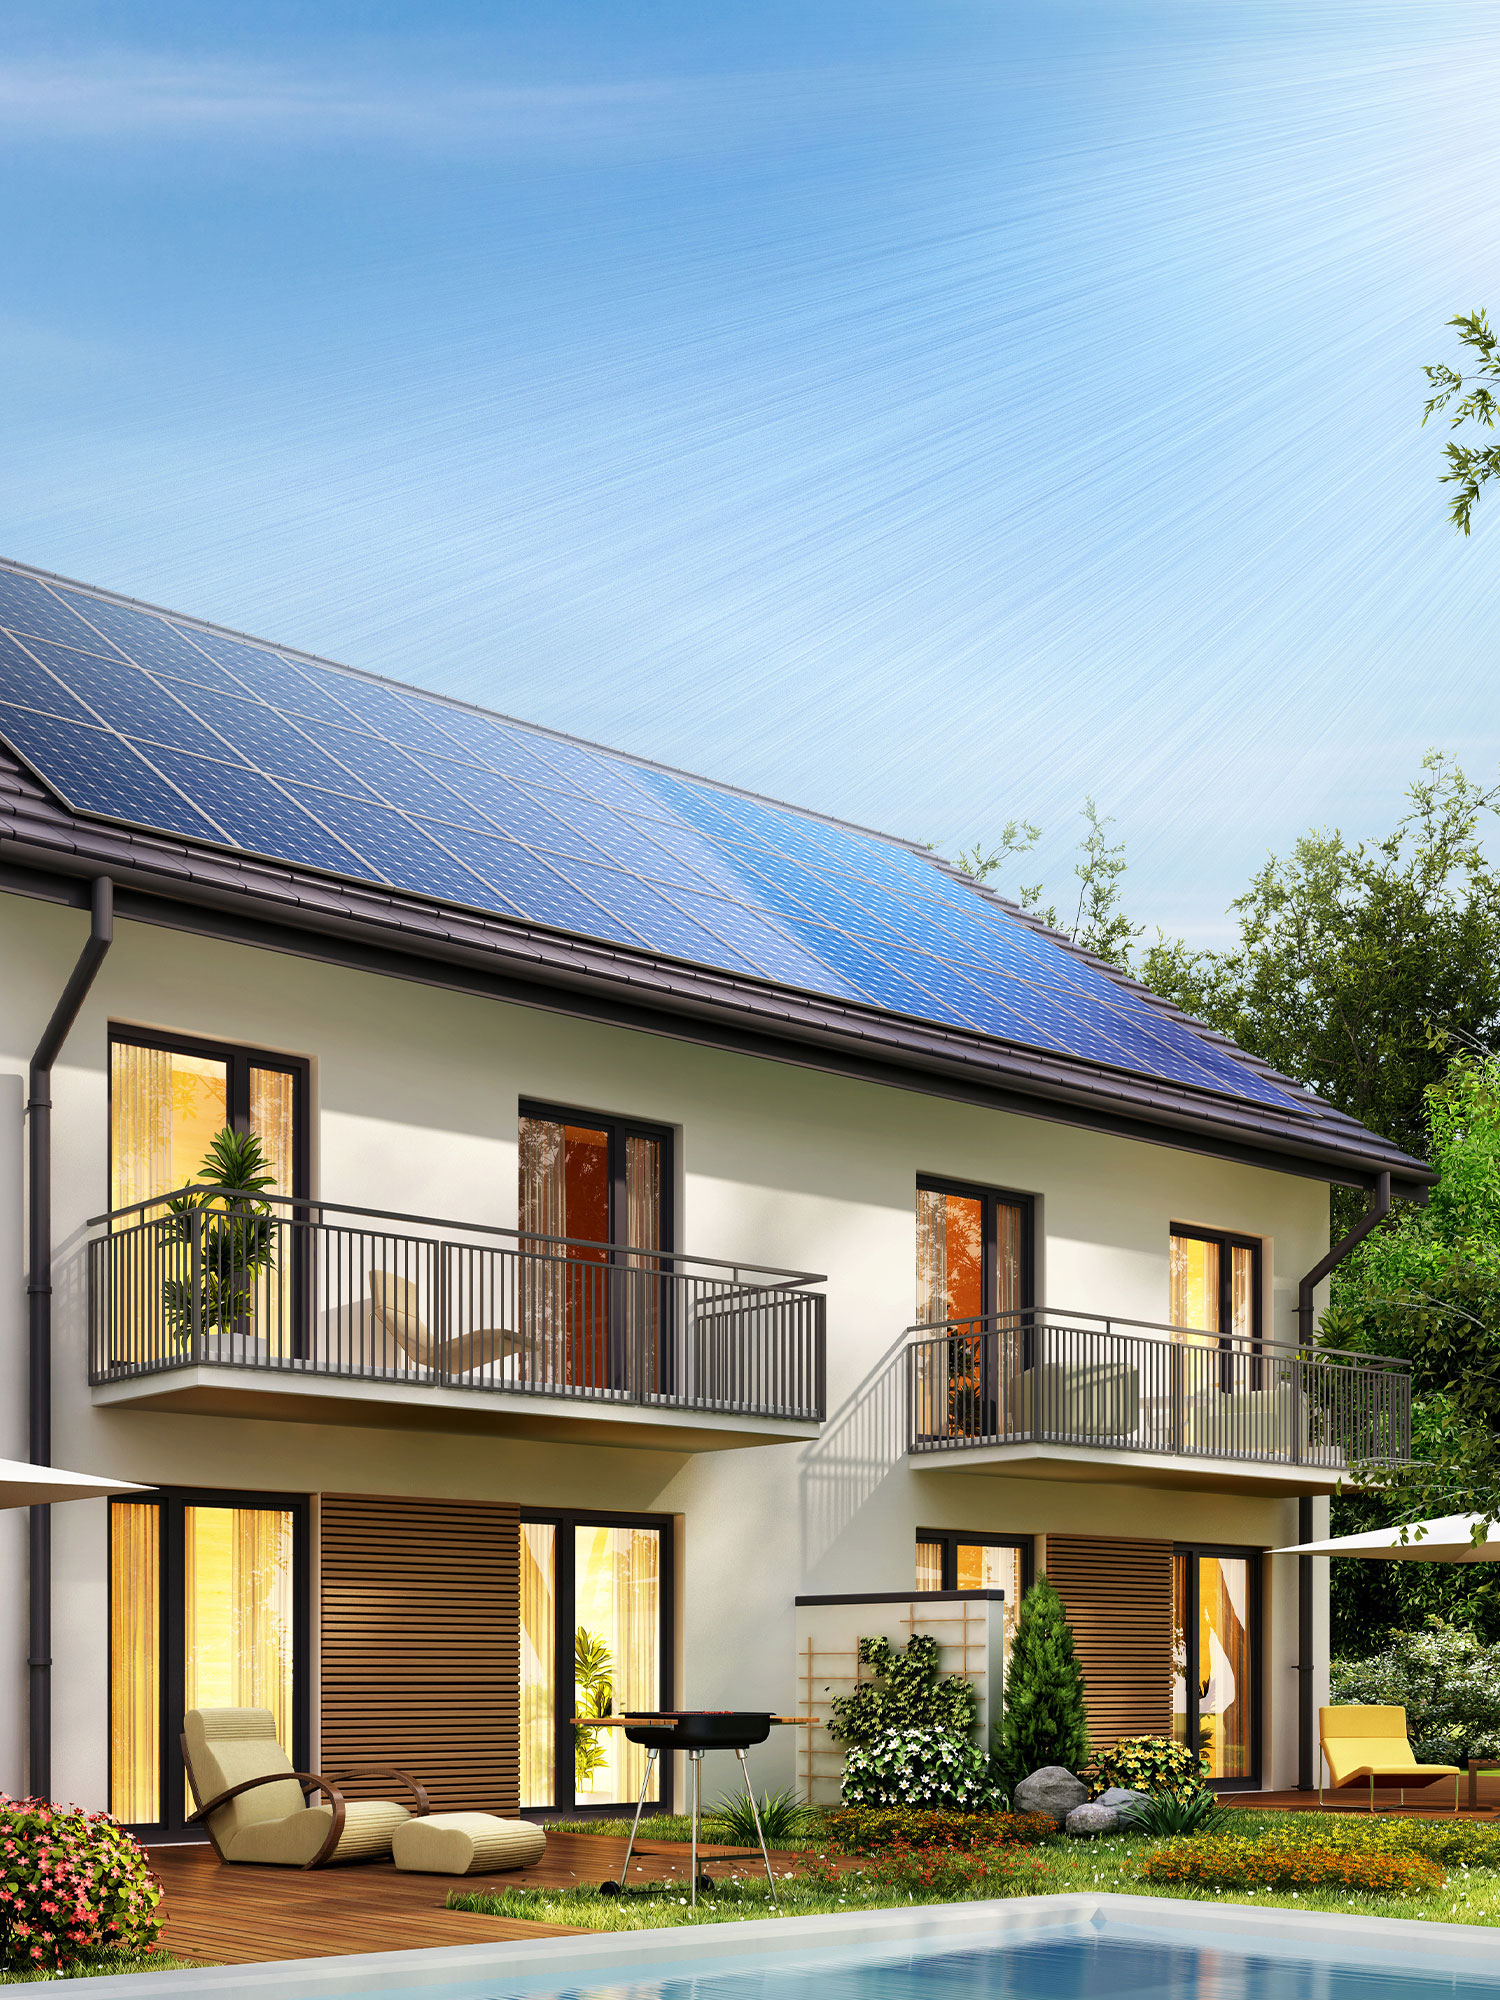 Energy independence for home in Utah is easy with SunPower by Custom Energy.